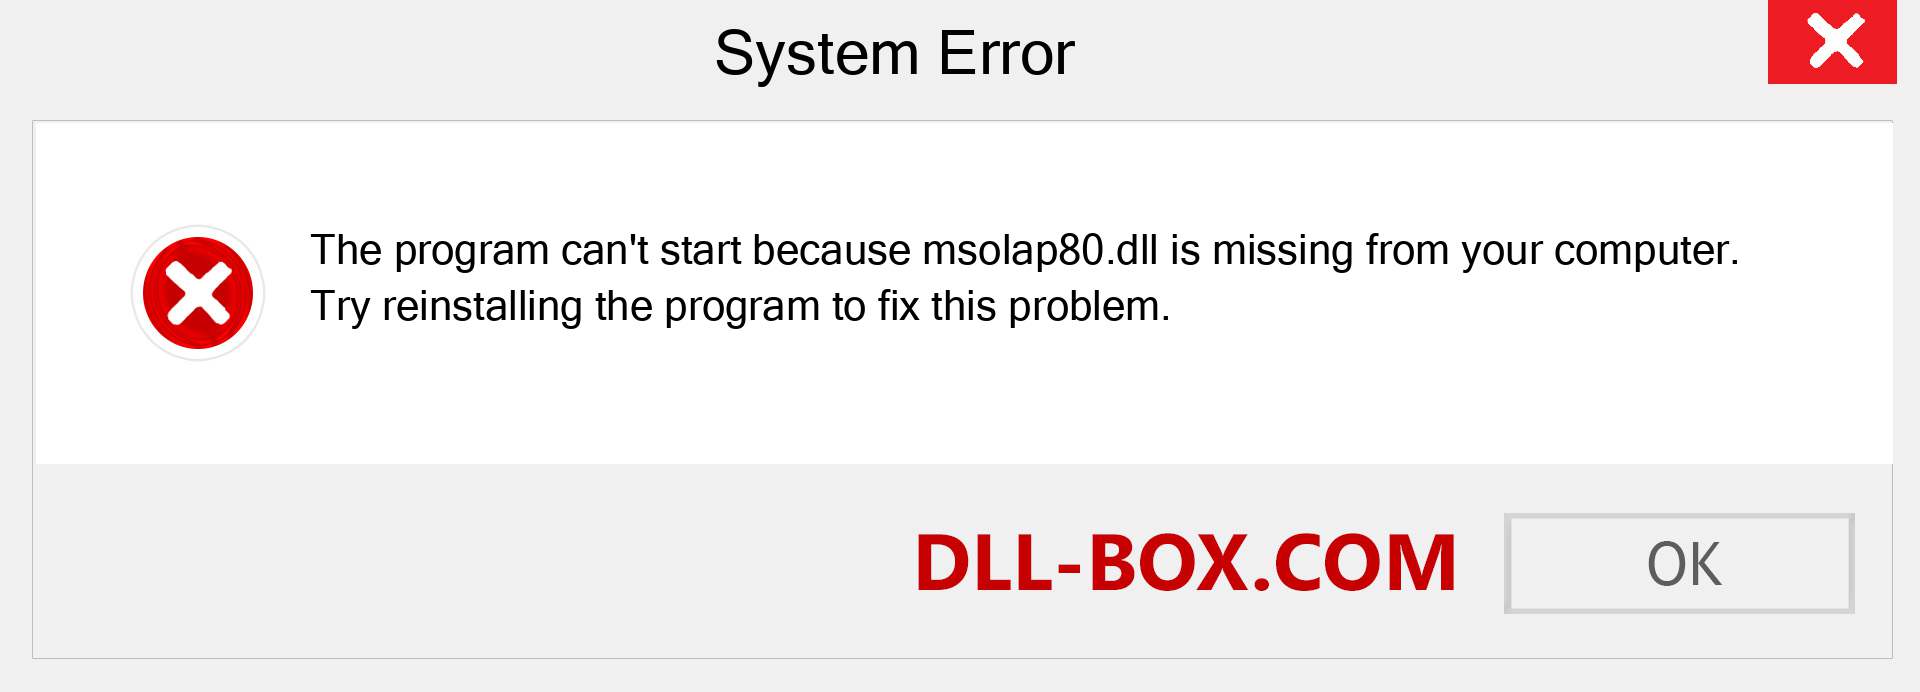  msolap80.dll file is missing?. Download for Windows 7, 8, 10 - Fix  msolap80 dll Missing Error on Windows, photos, images